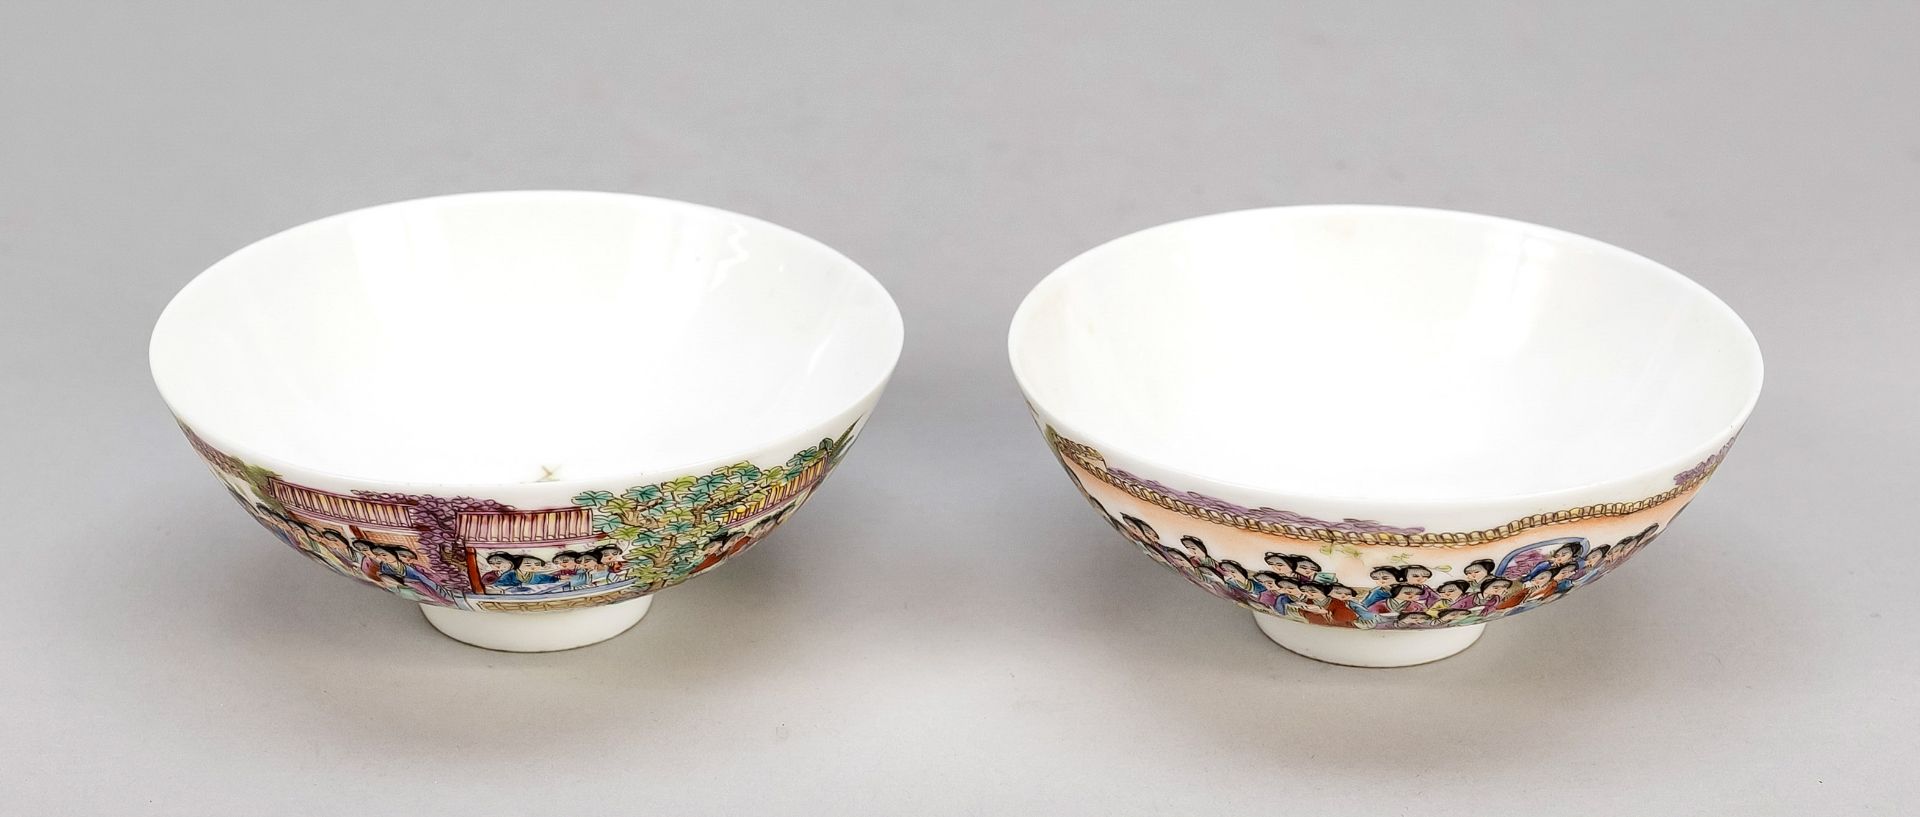 Pair of tea bowls 100 beauties, China, probably republic period(1912-1949), porcelain with